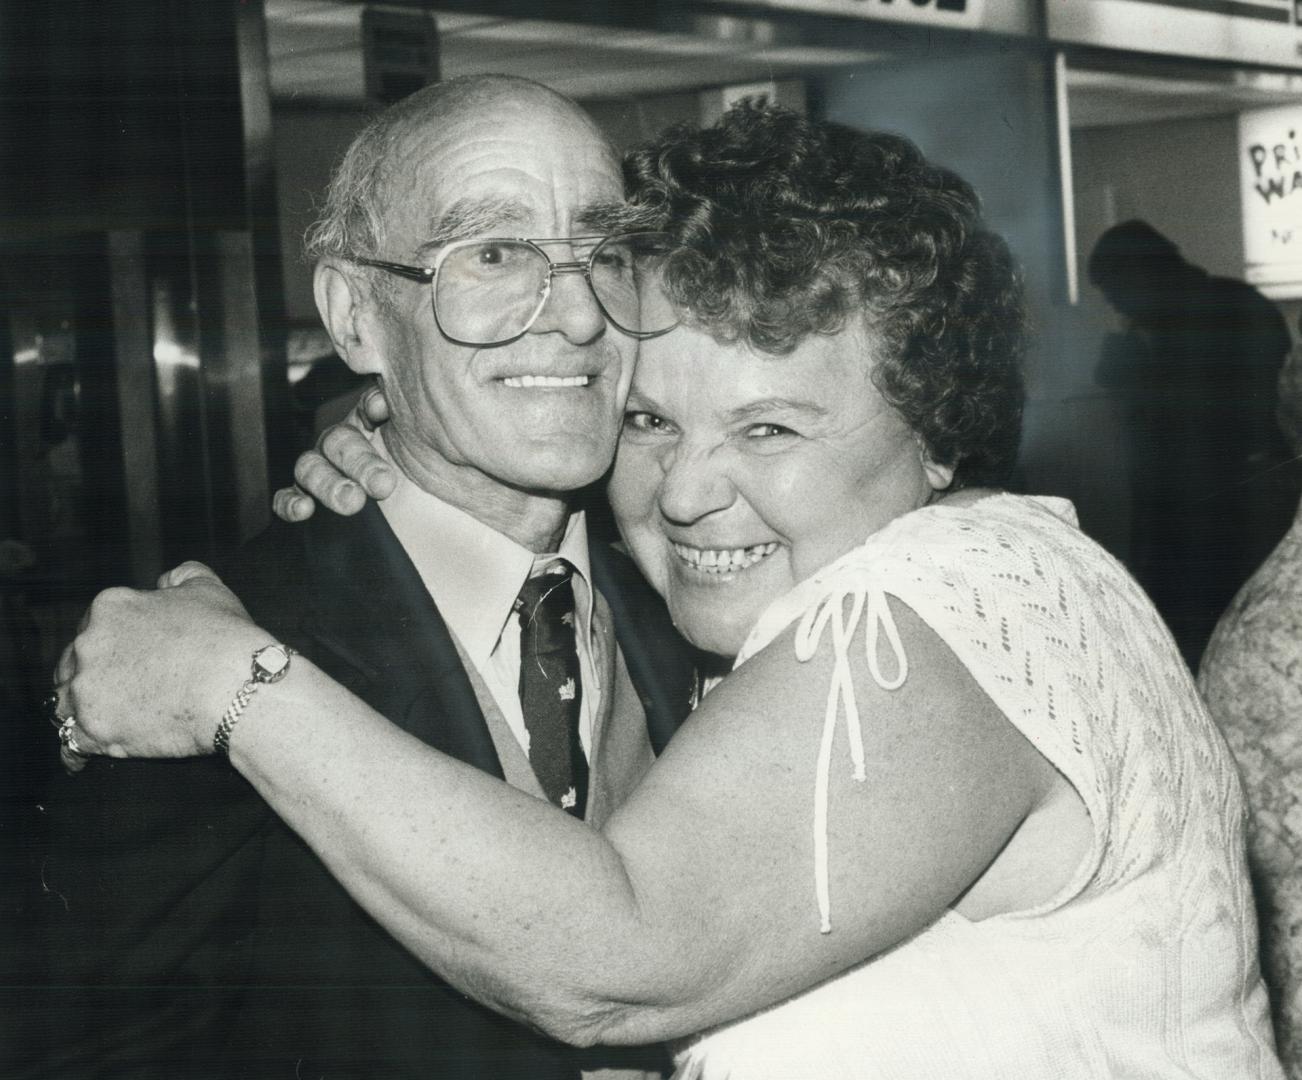 Arthur Middleton gets a joyful hug from niece Jean Bates who started searching for him